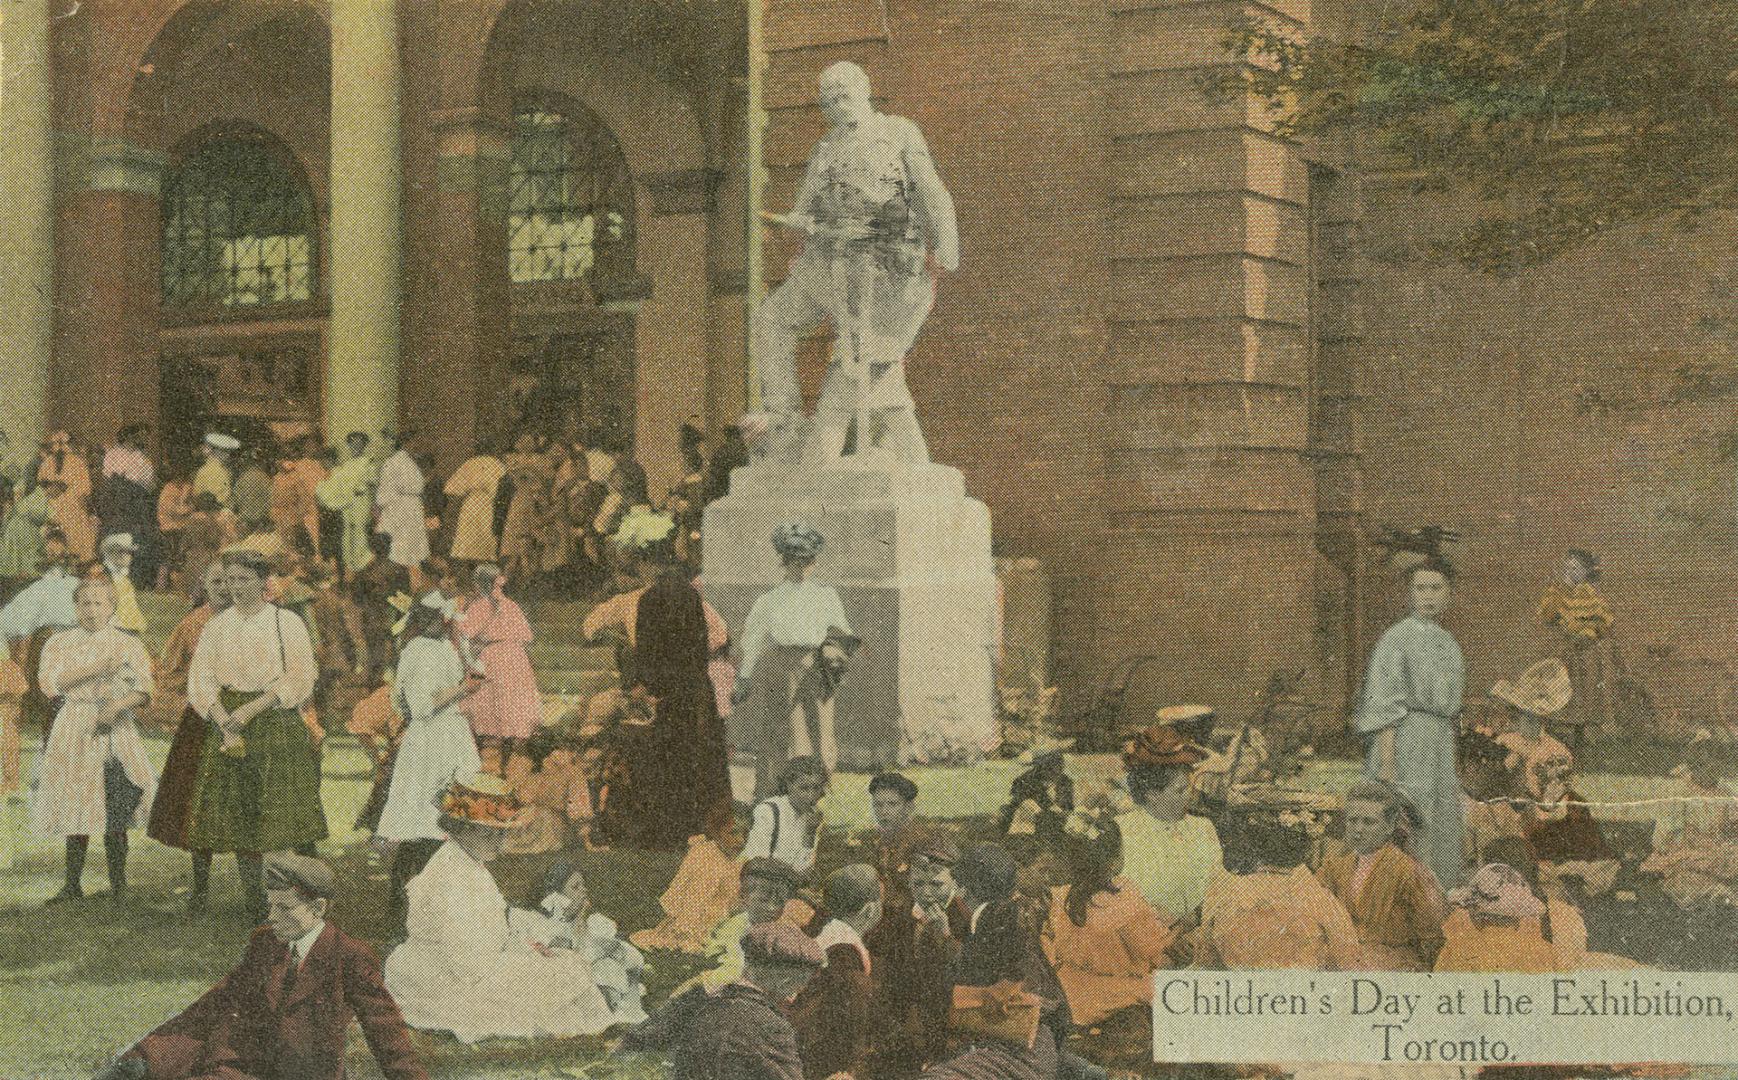 Children's Day at the Exhibition, Toronto